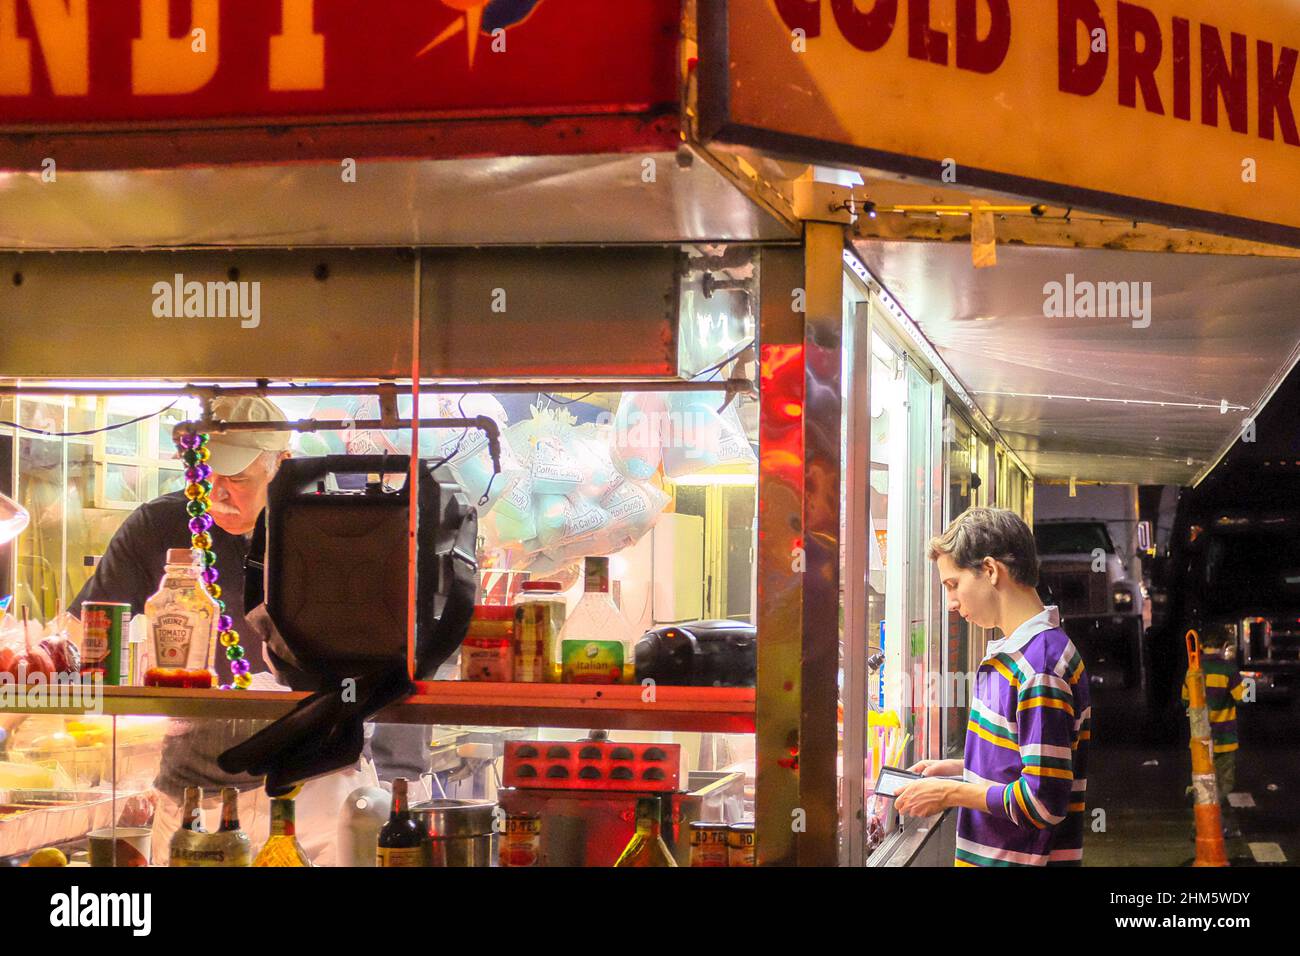 NEW ORLEANS, LA, USA - FEBRUARY 24, 2017: Paradegoer ordering concessions at a food truck along the Mardi Gras parade route in New Orleans Stock Photo